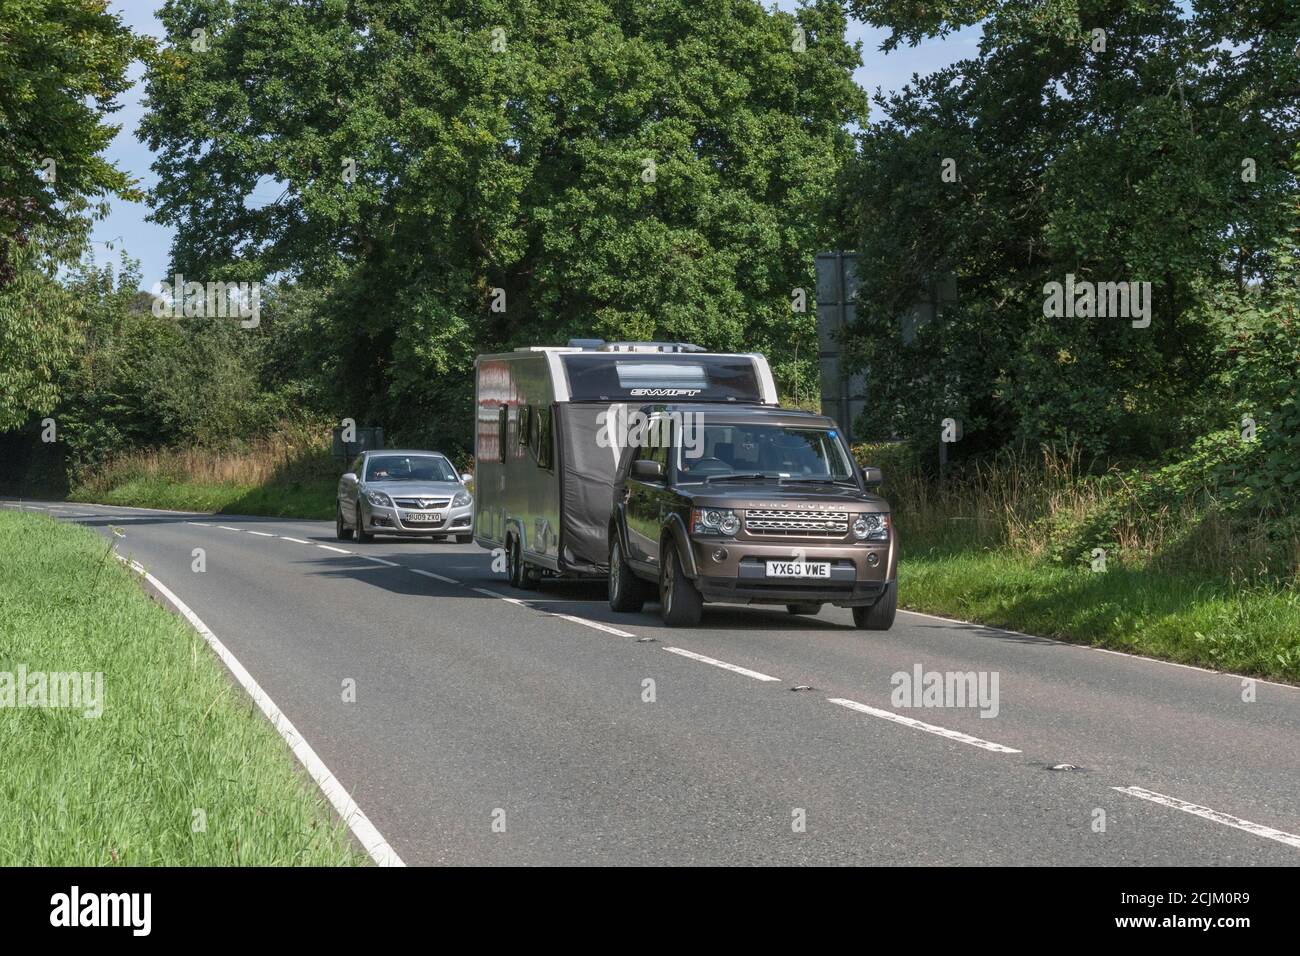 Car towing a caravan along a country road at Lostwithiel, Cornwall, during the summer holiday season. For staycations in UK, caravanning, UK holidays. Stock Photo